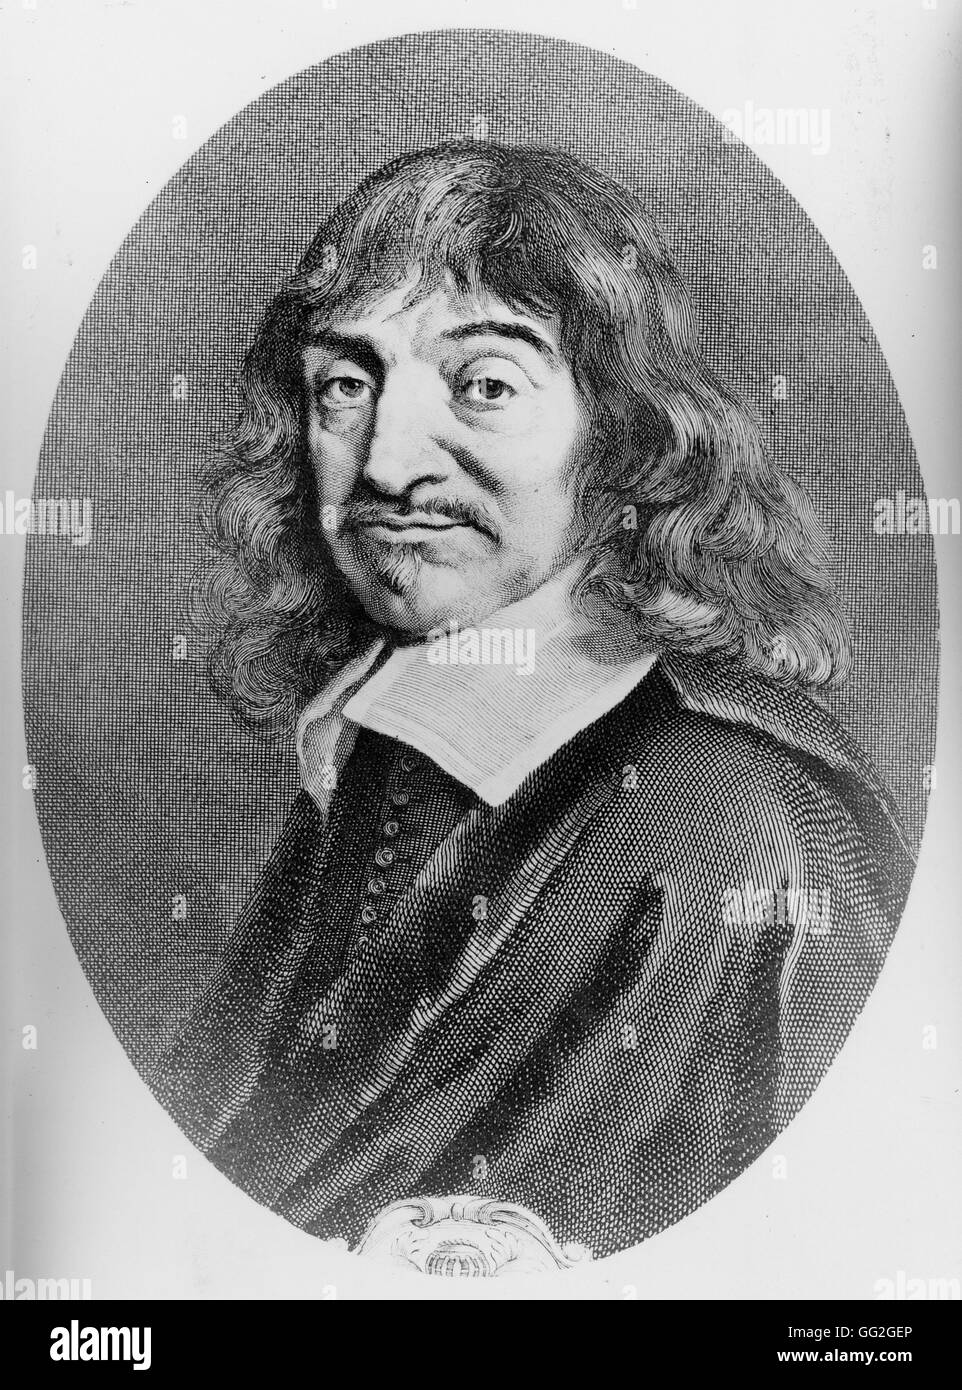 Portrait of René Descartes, French philosopher. 19th century Engraving probably from Frans Hals. Stock Photo